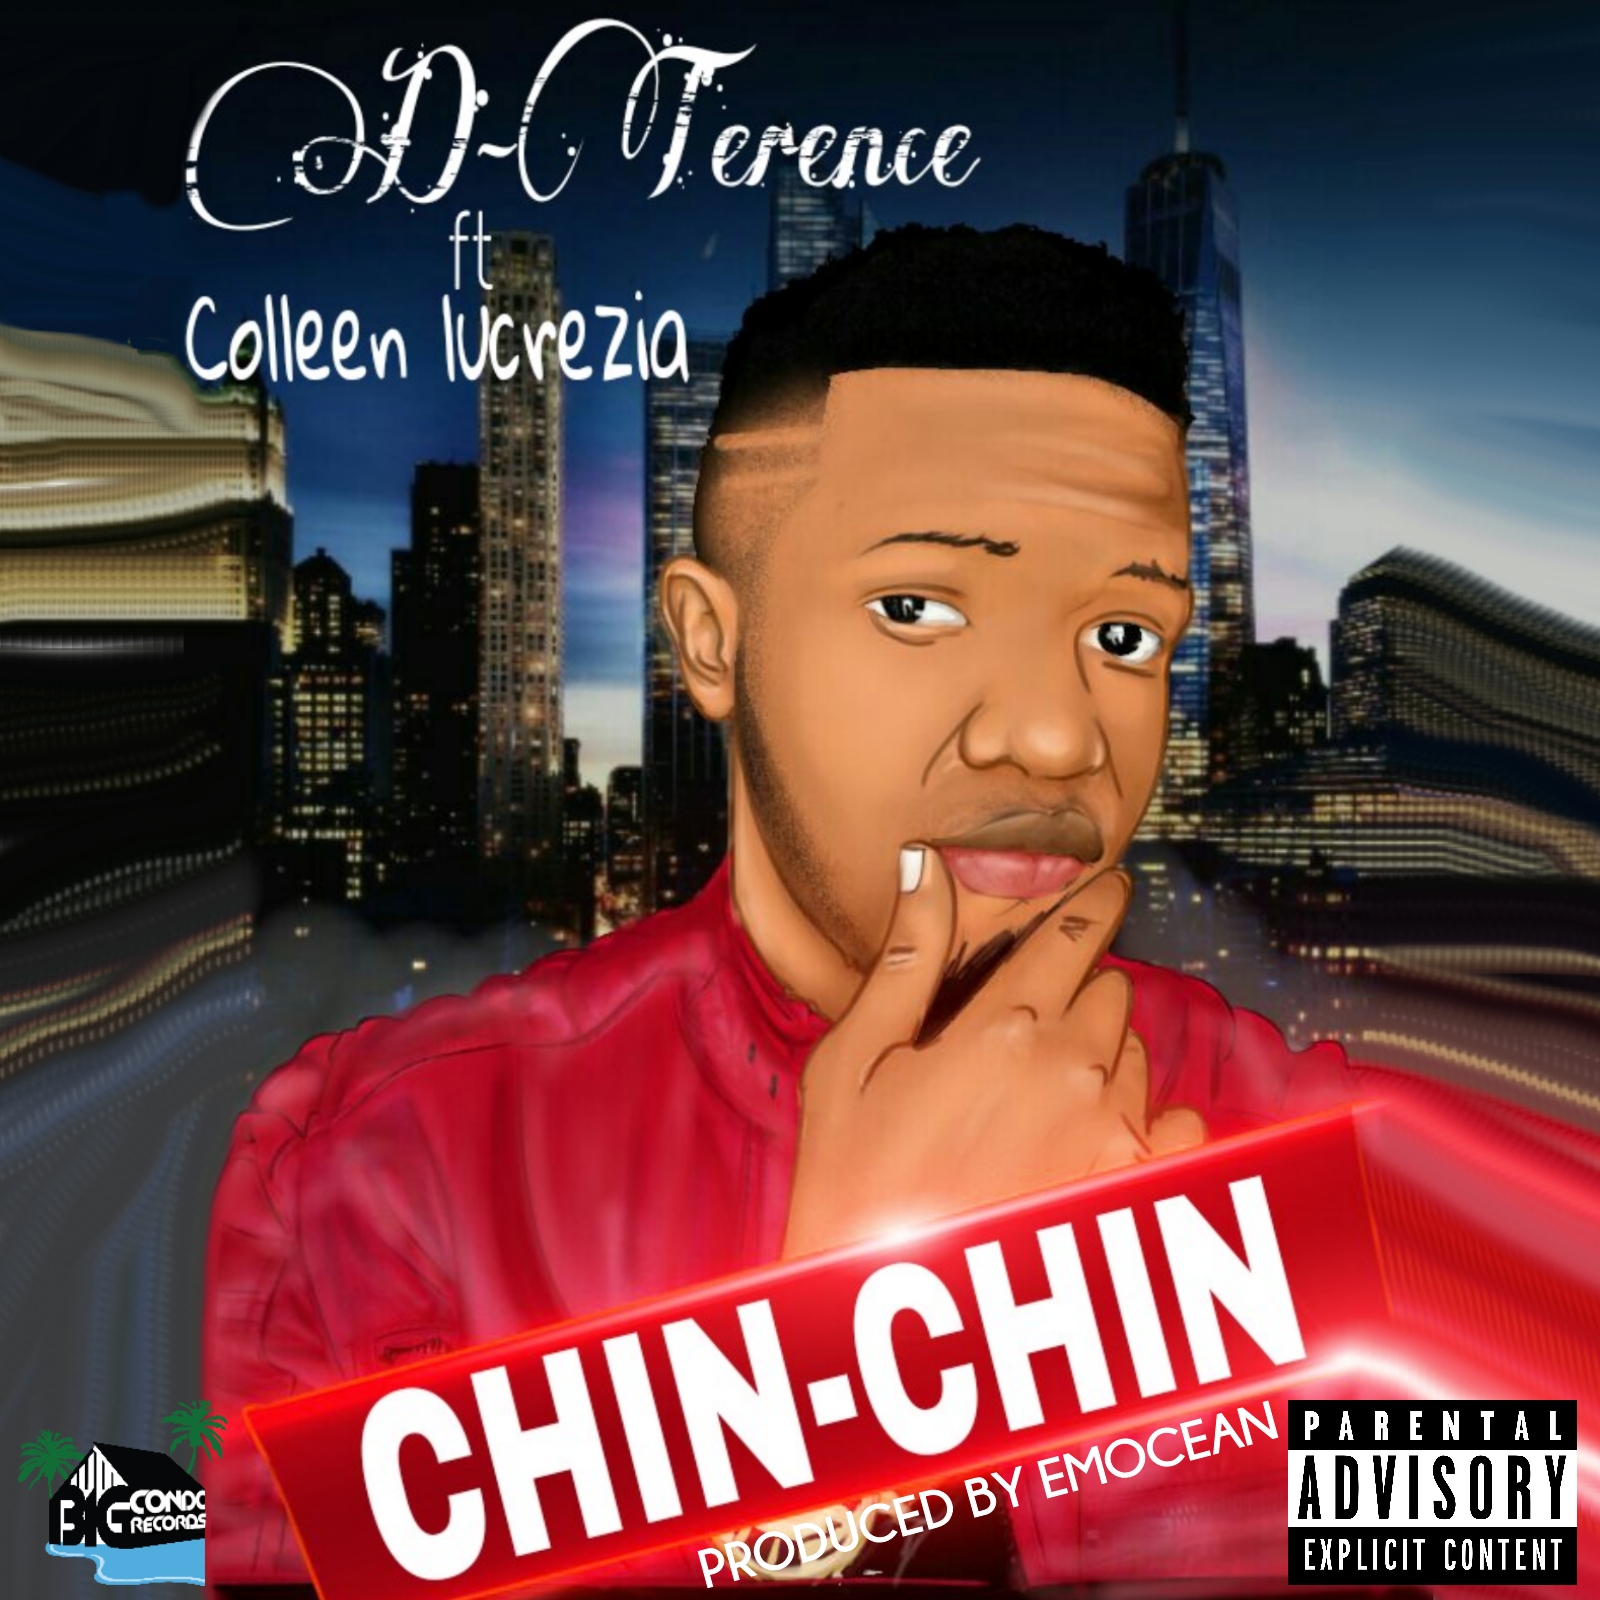 d-terence-chin-chin